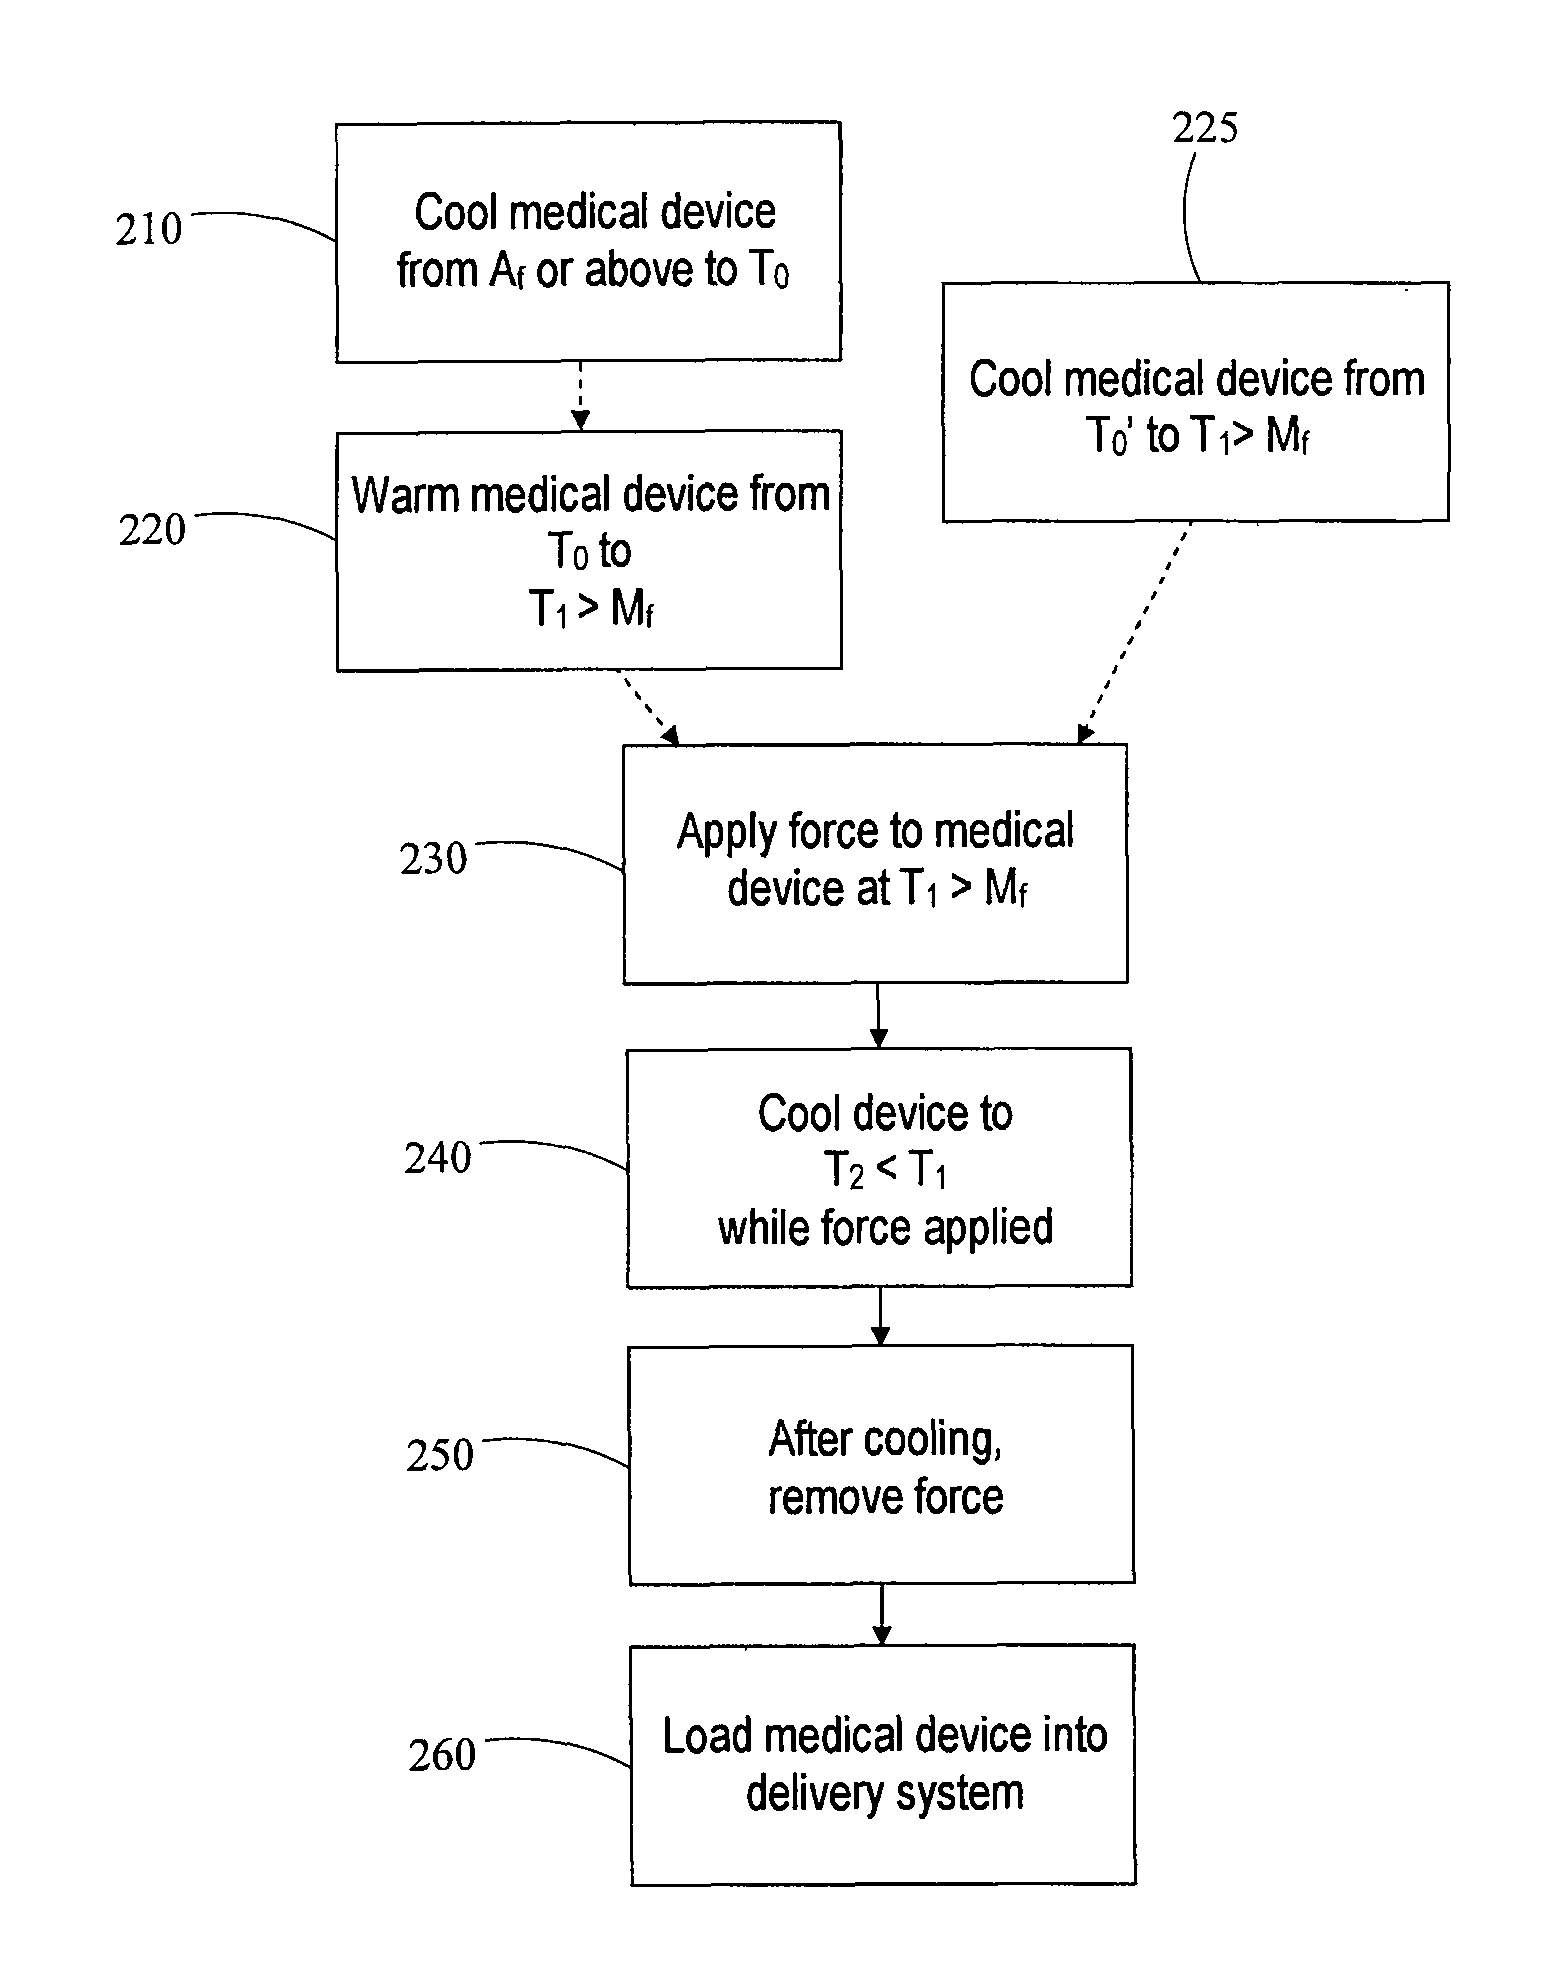 Method for loading a medical device into a delivery system